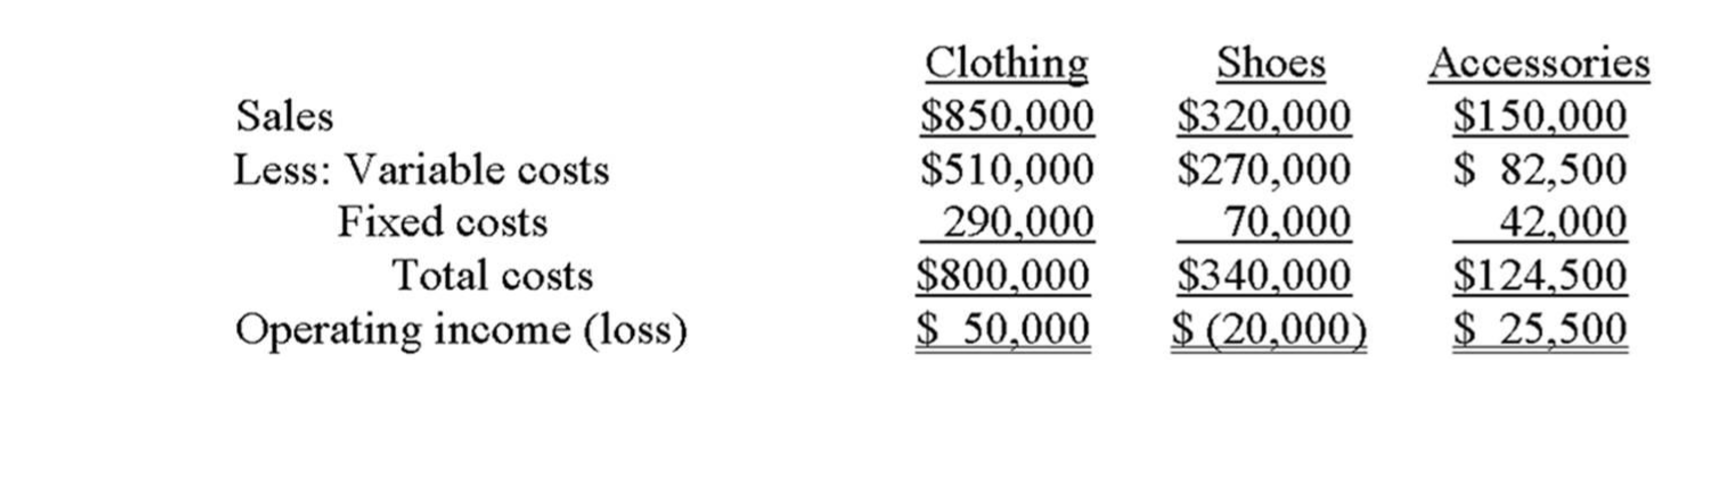 Clothing
$850.000
$510,000
290,000
$800,000
$ 50,000
Shoes
$320,000
$270,000
70,000
$340.000
S(20,000)
Accessories
$150.000
82,500
42.000
$124.500
S 25,500
Sales
Less: Variable costs
Fixed costs
Total costs
Operating income (loss)
